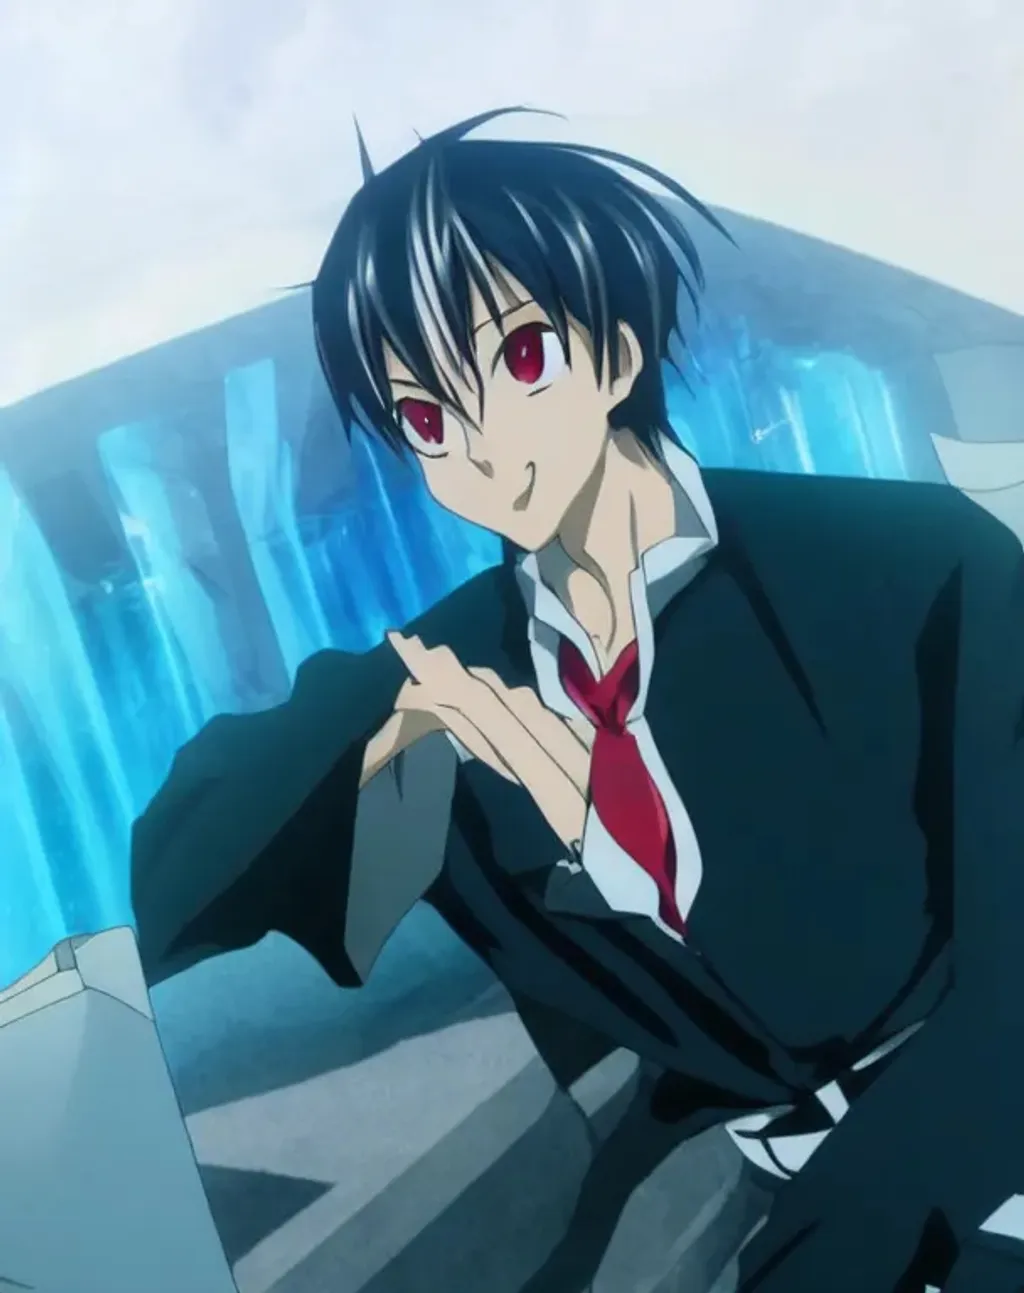 Male anime character in High School DxD